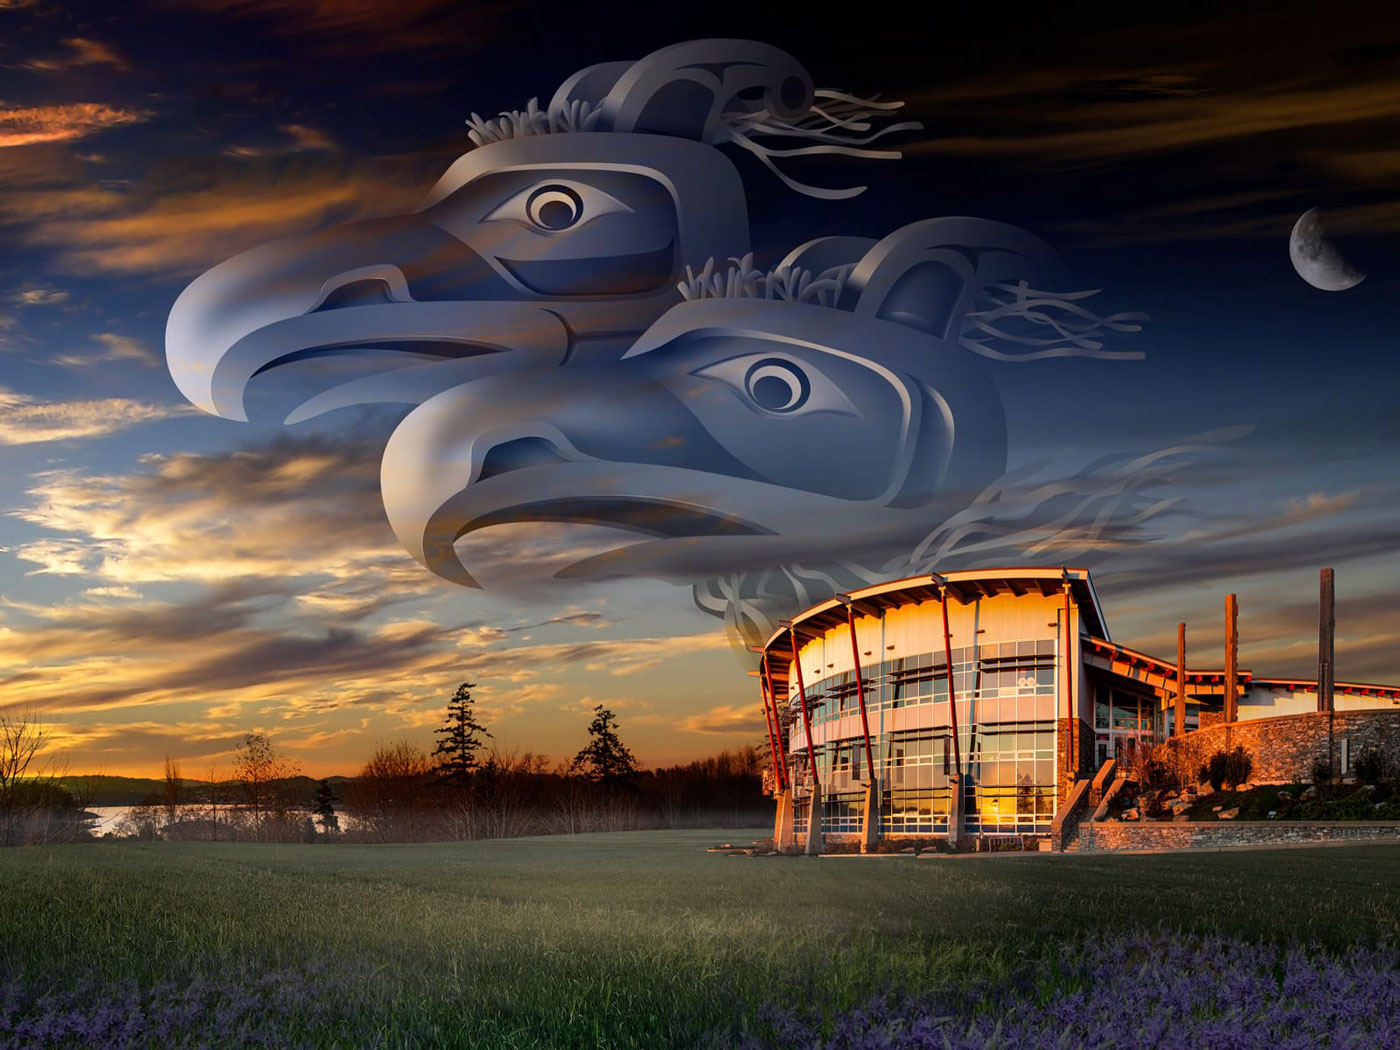 A composite photo/digital illustration of the Songhees Wellness Centre, the location of Animikii's headquarters. The building is surrounded by a vast green lawn covered with Camas flowers. Two Thunderbirds are depicted hovering in the sky, facing west towards the setting sun.